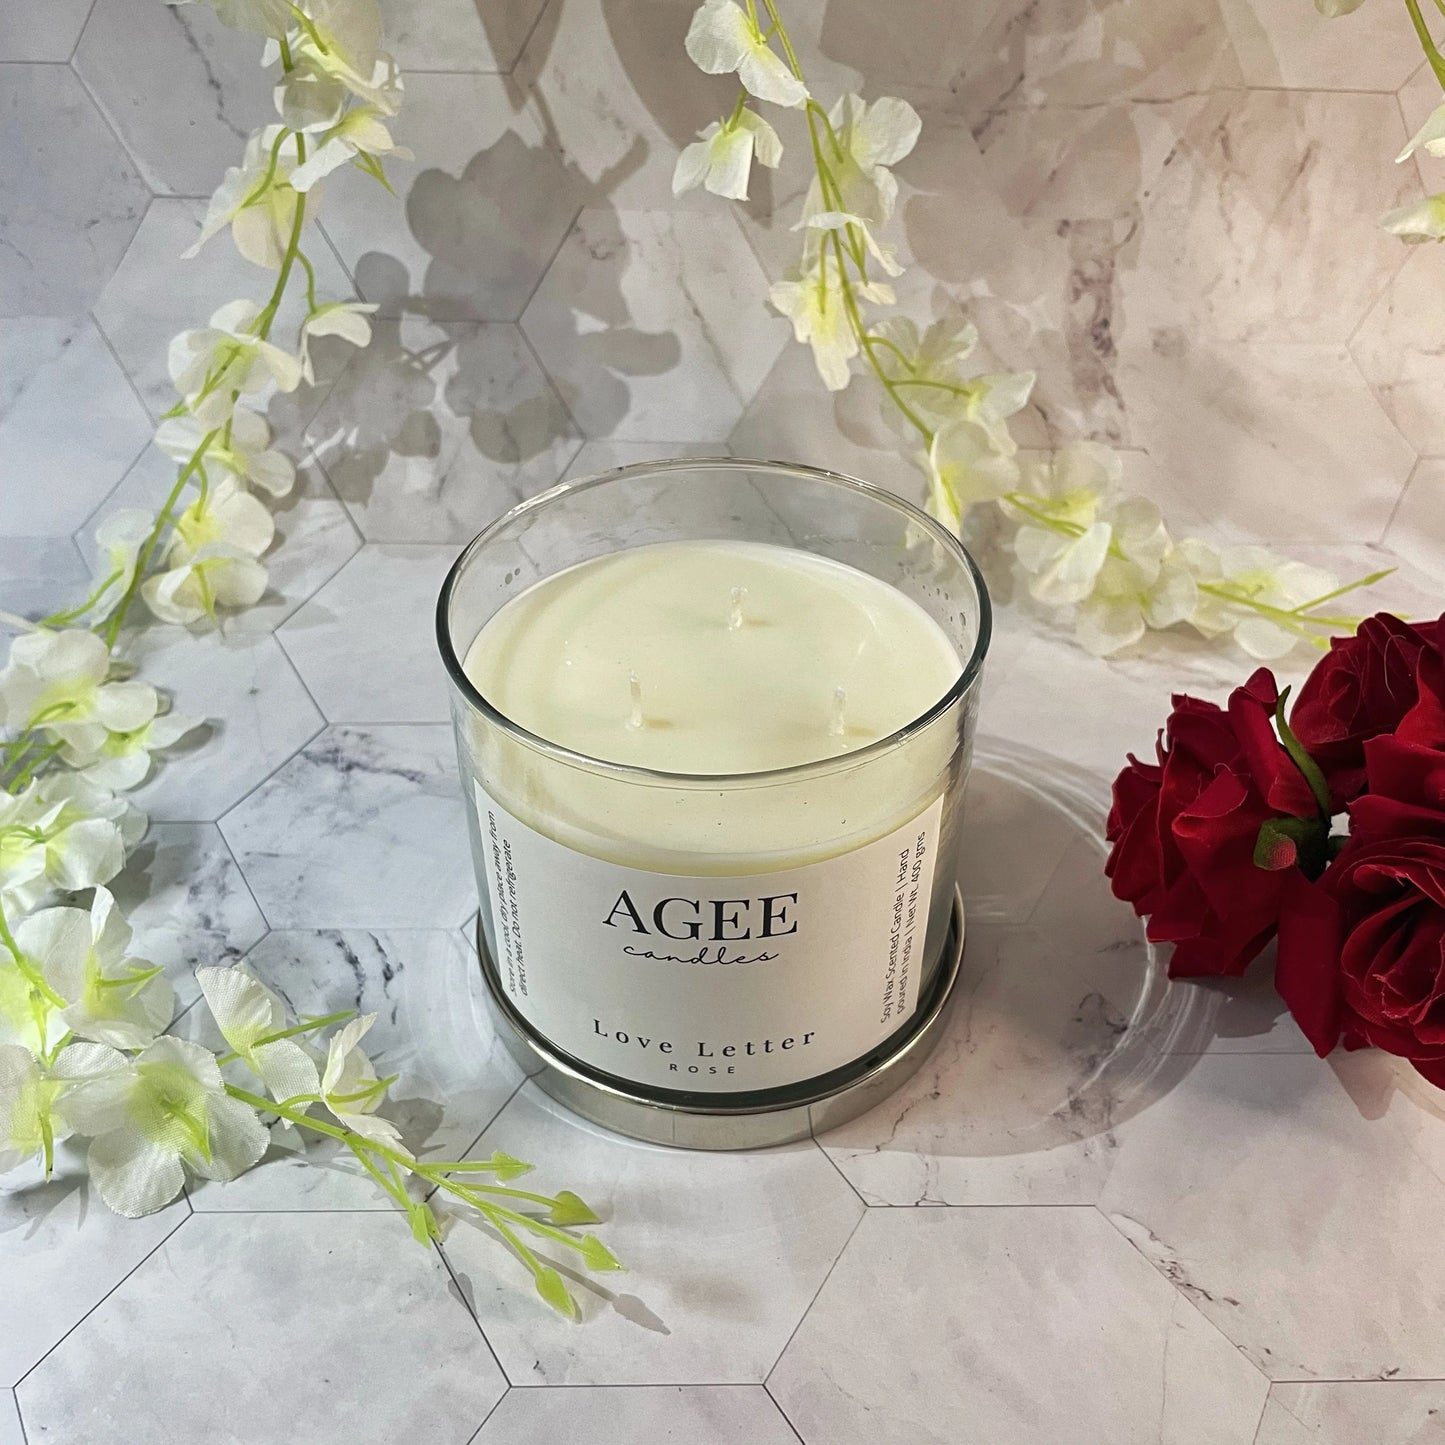 Love Letter 3-Wick Scented Candle - AGEE Candles